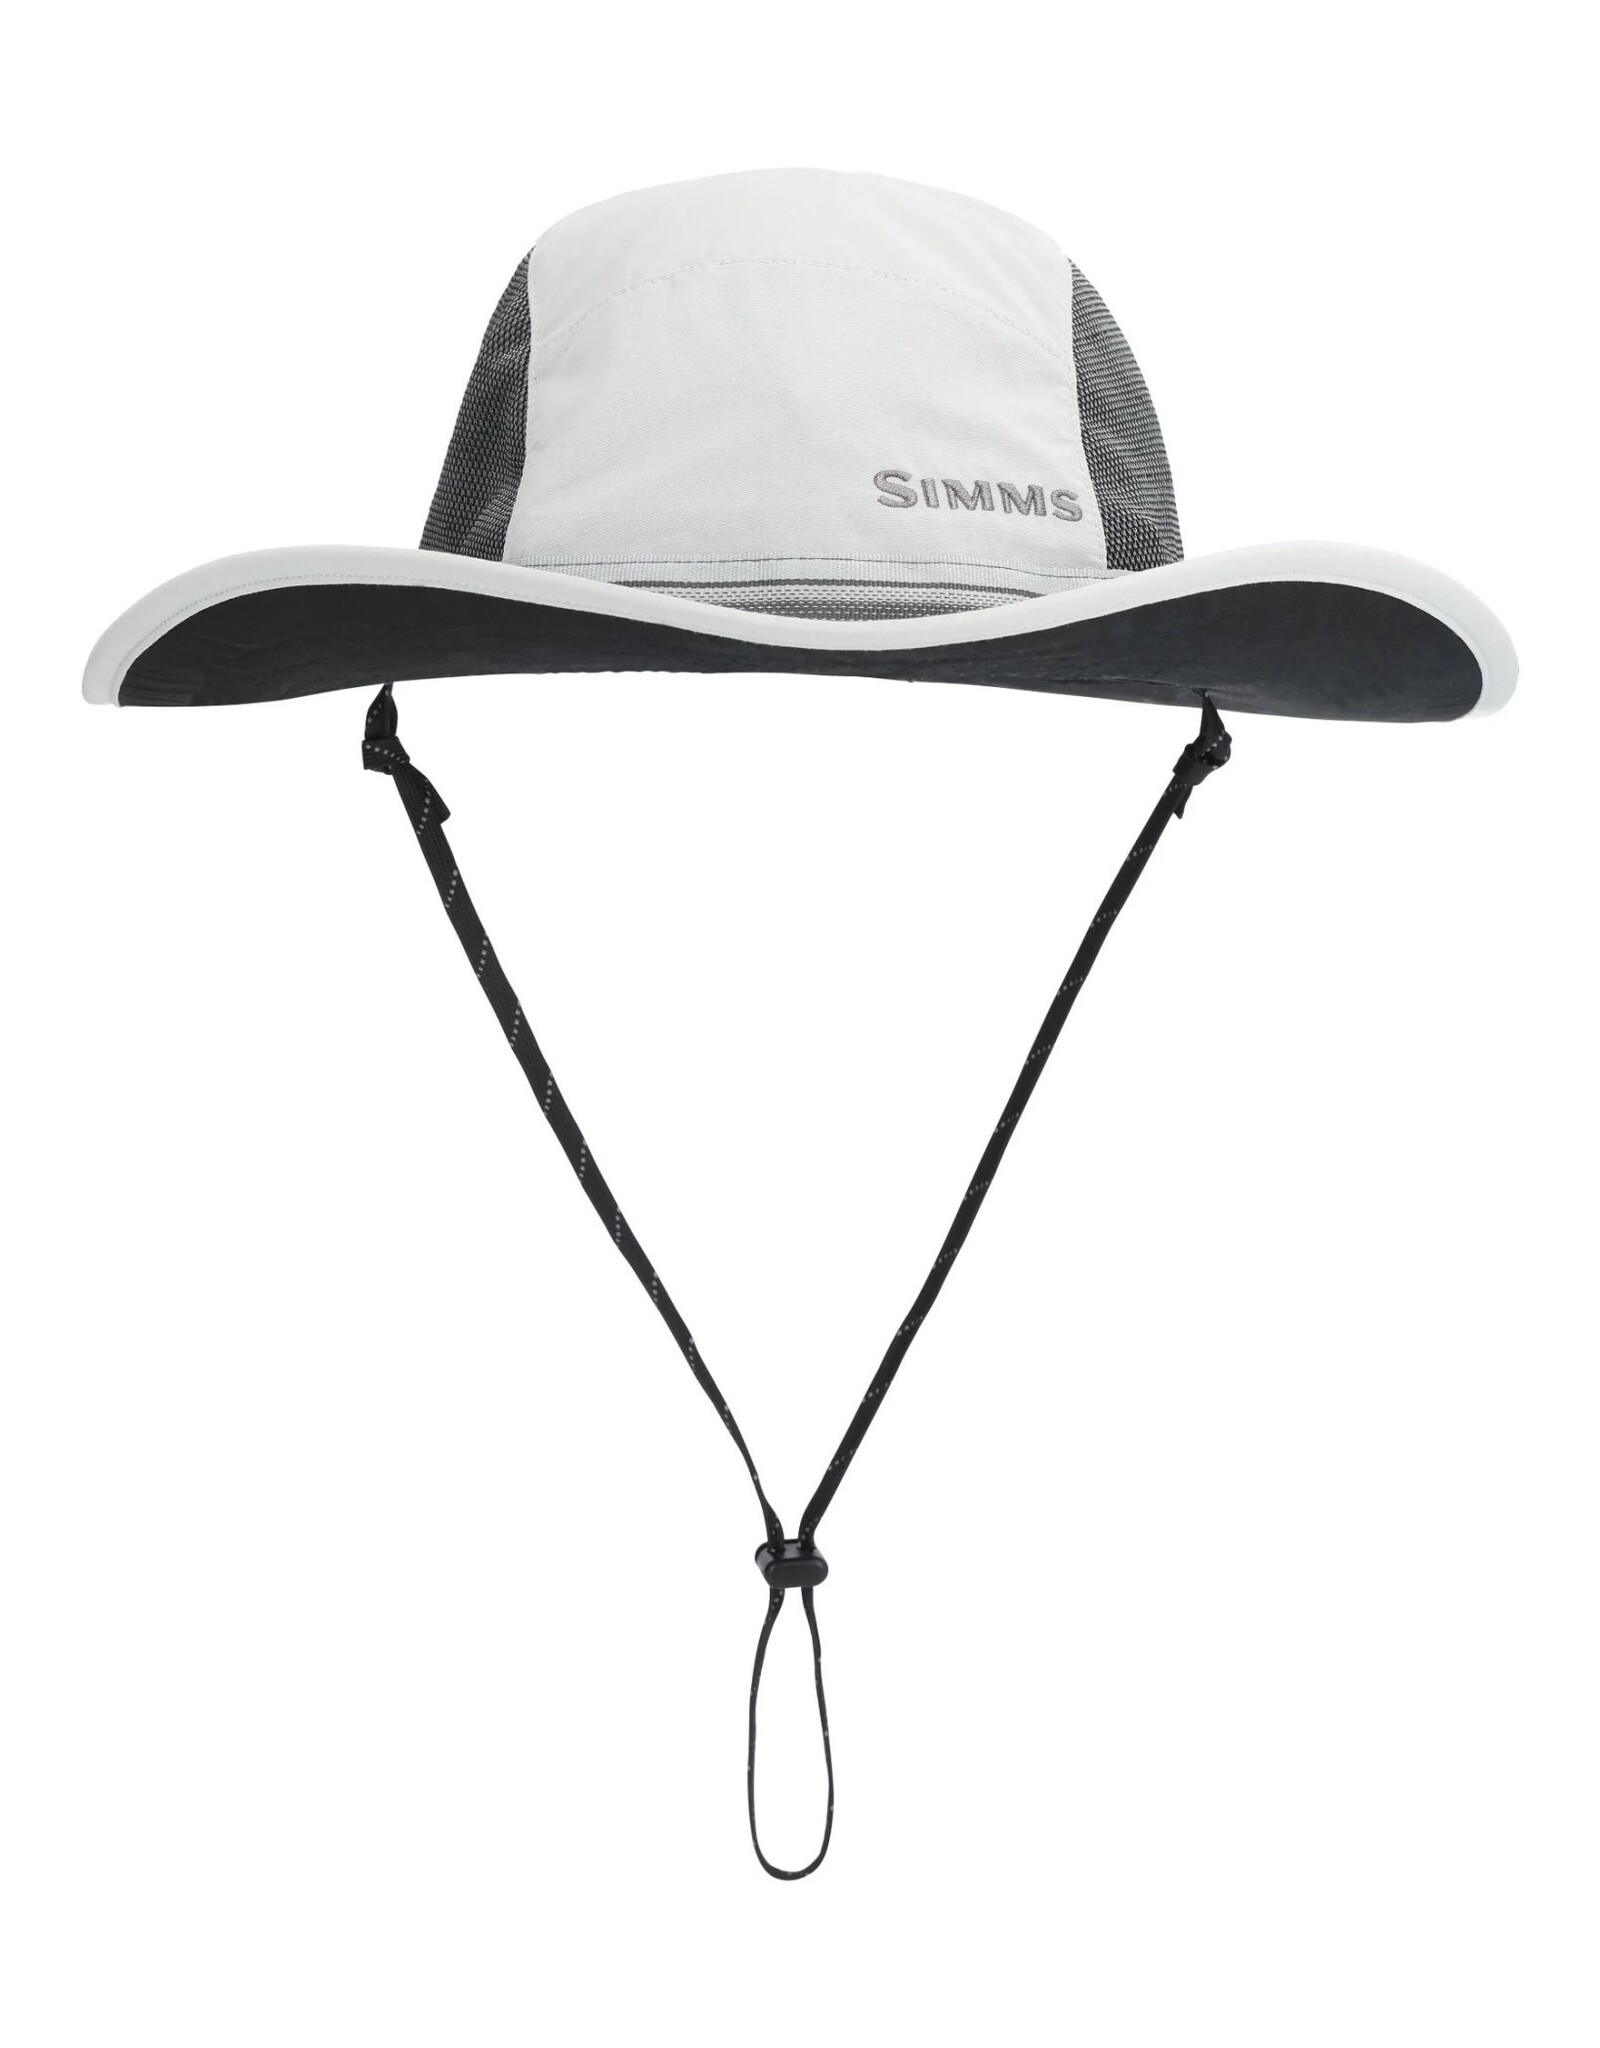 Simms Solar Sombrero (Sterling) - Royal Gorge Anglers